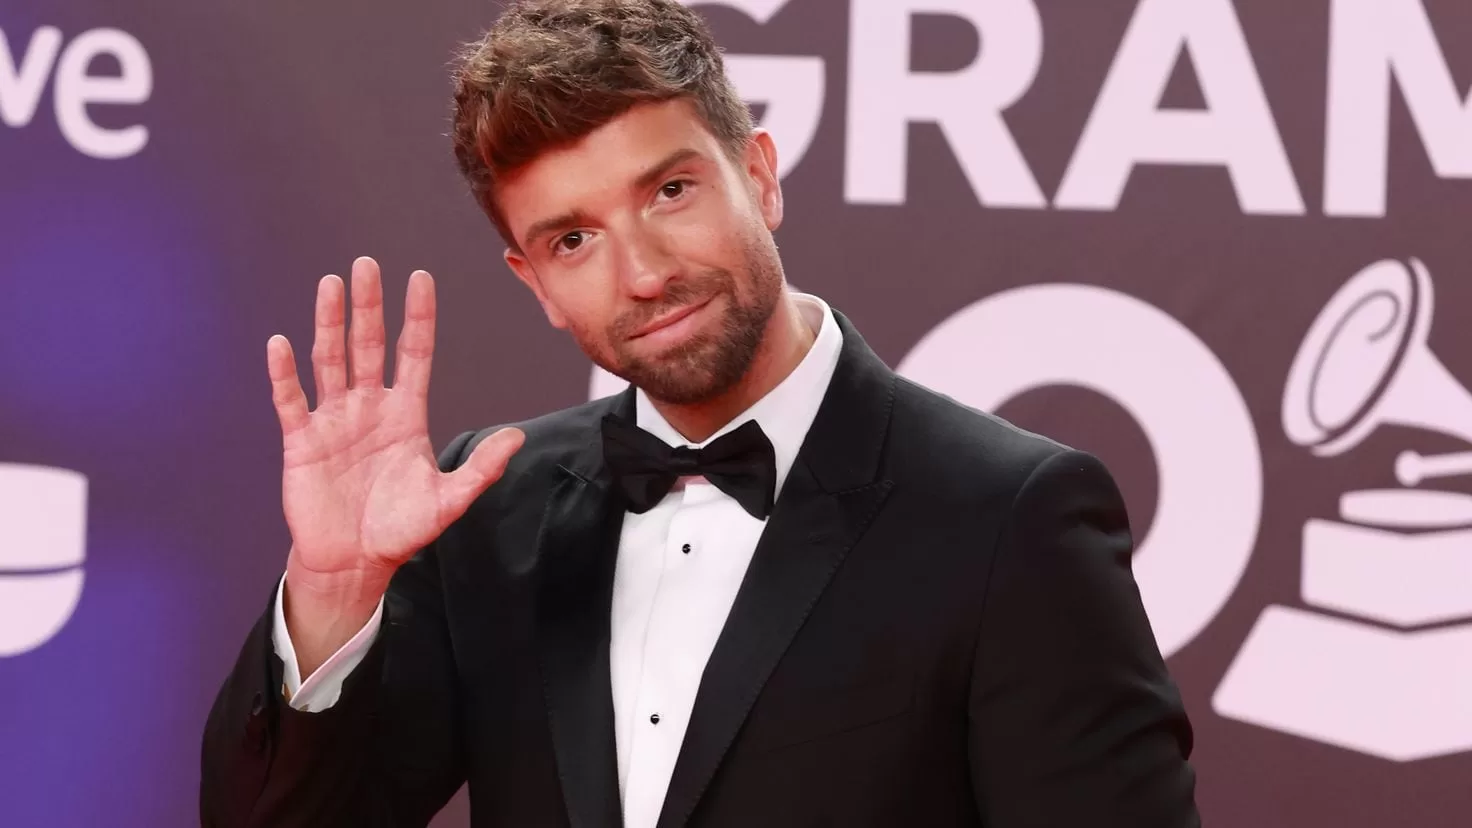 Pablo Alborn, on the rumors of a relationship with Miguel Bos: I have to laugh
